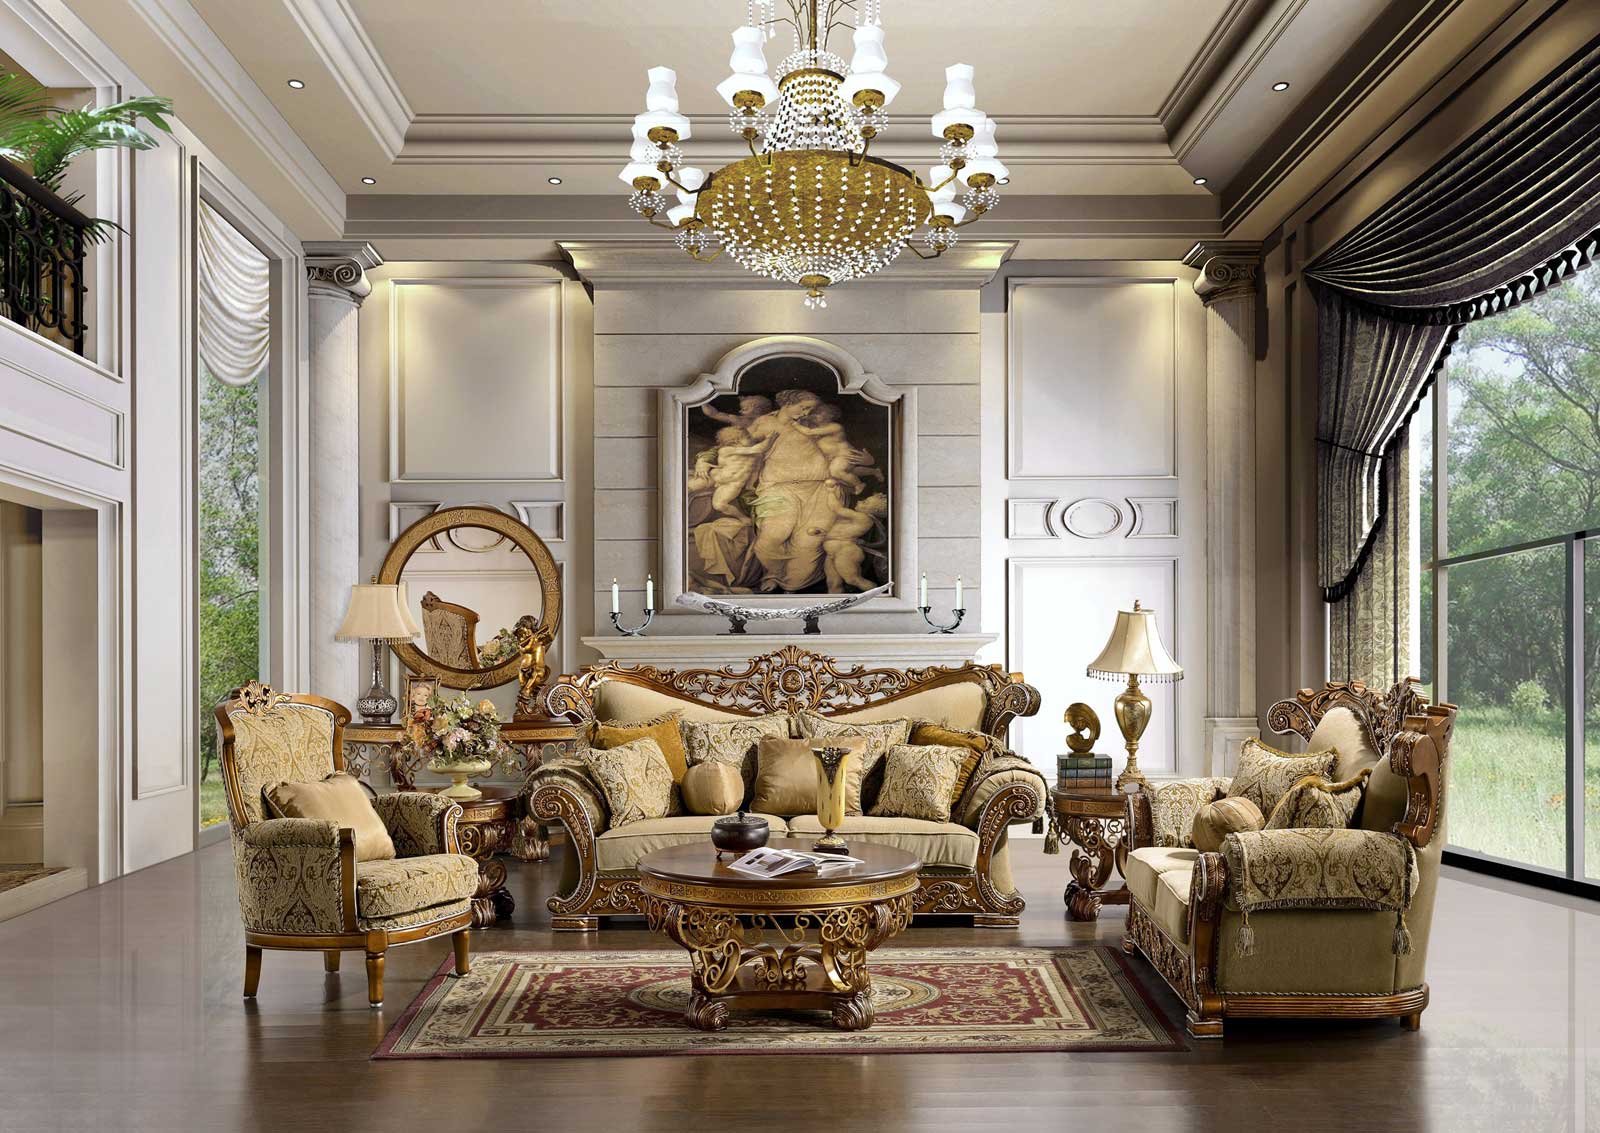 Greece Living With Awesome Greece Living Room Design With Antique Sofas And Living Room Chair Completed With Round Table On Rug And Furnished With Chandelier Lighting Living Room Perfect Living Room Chair Design